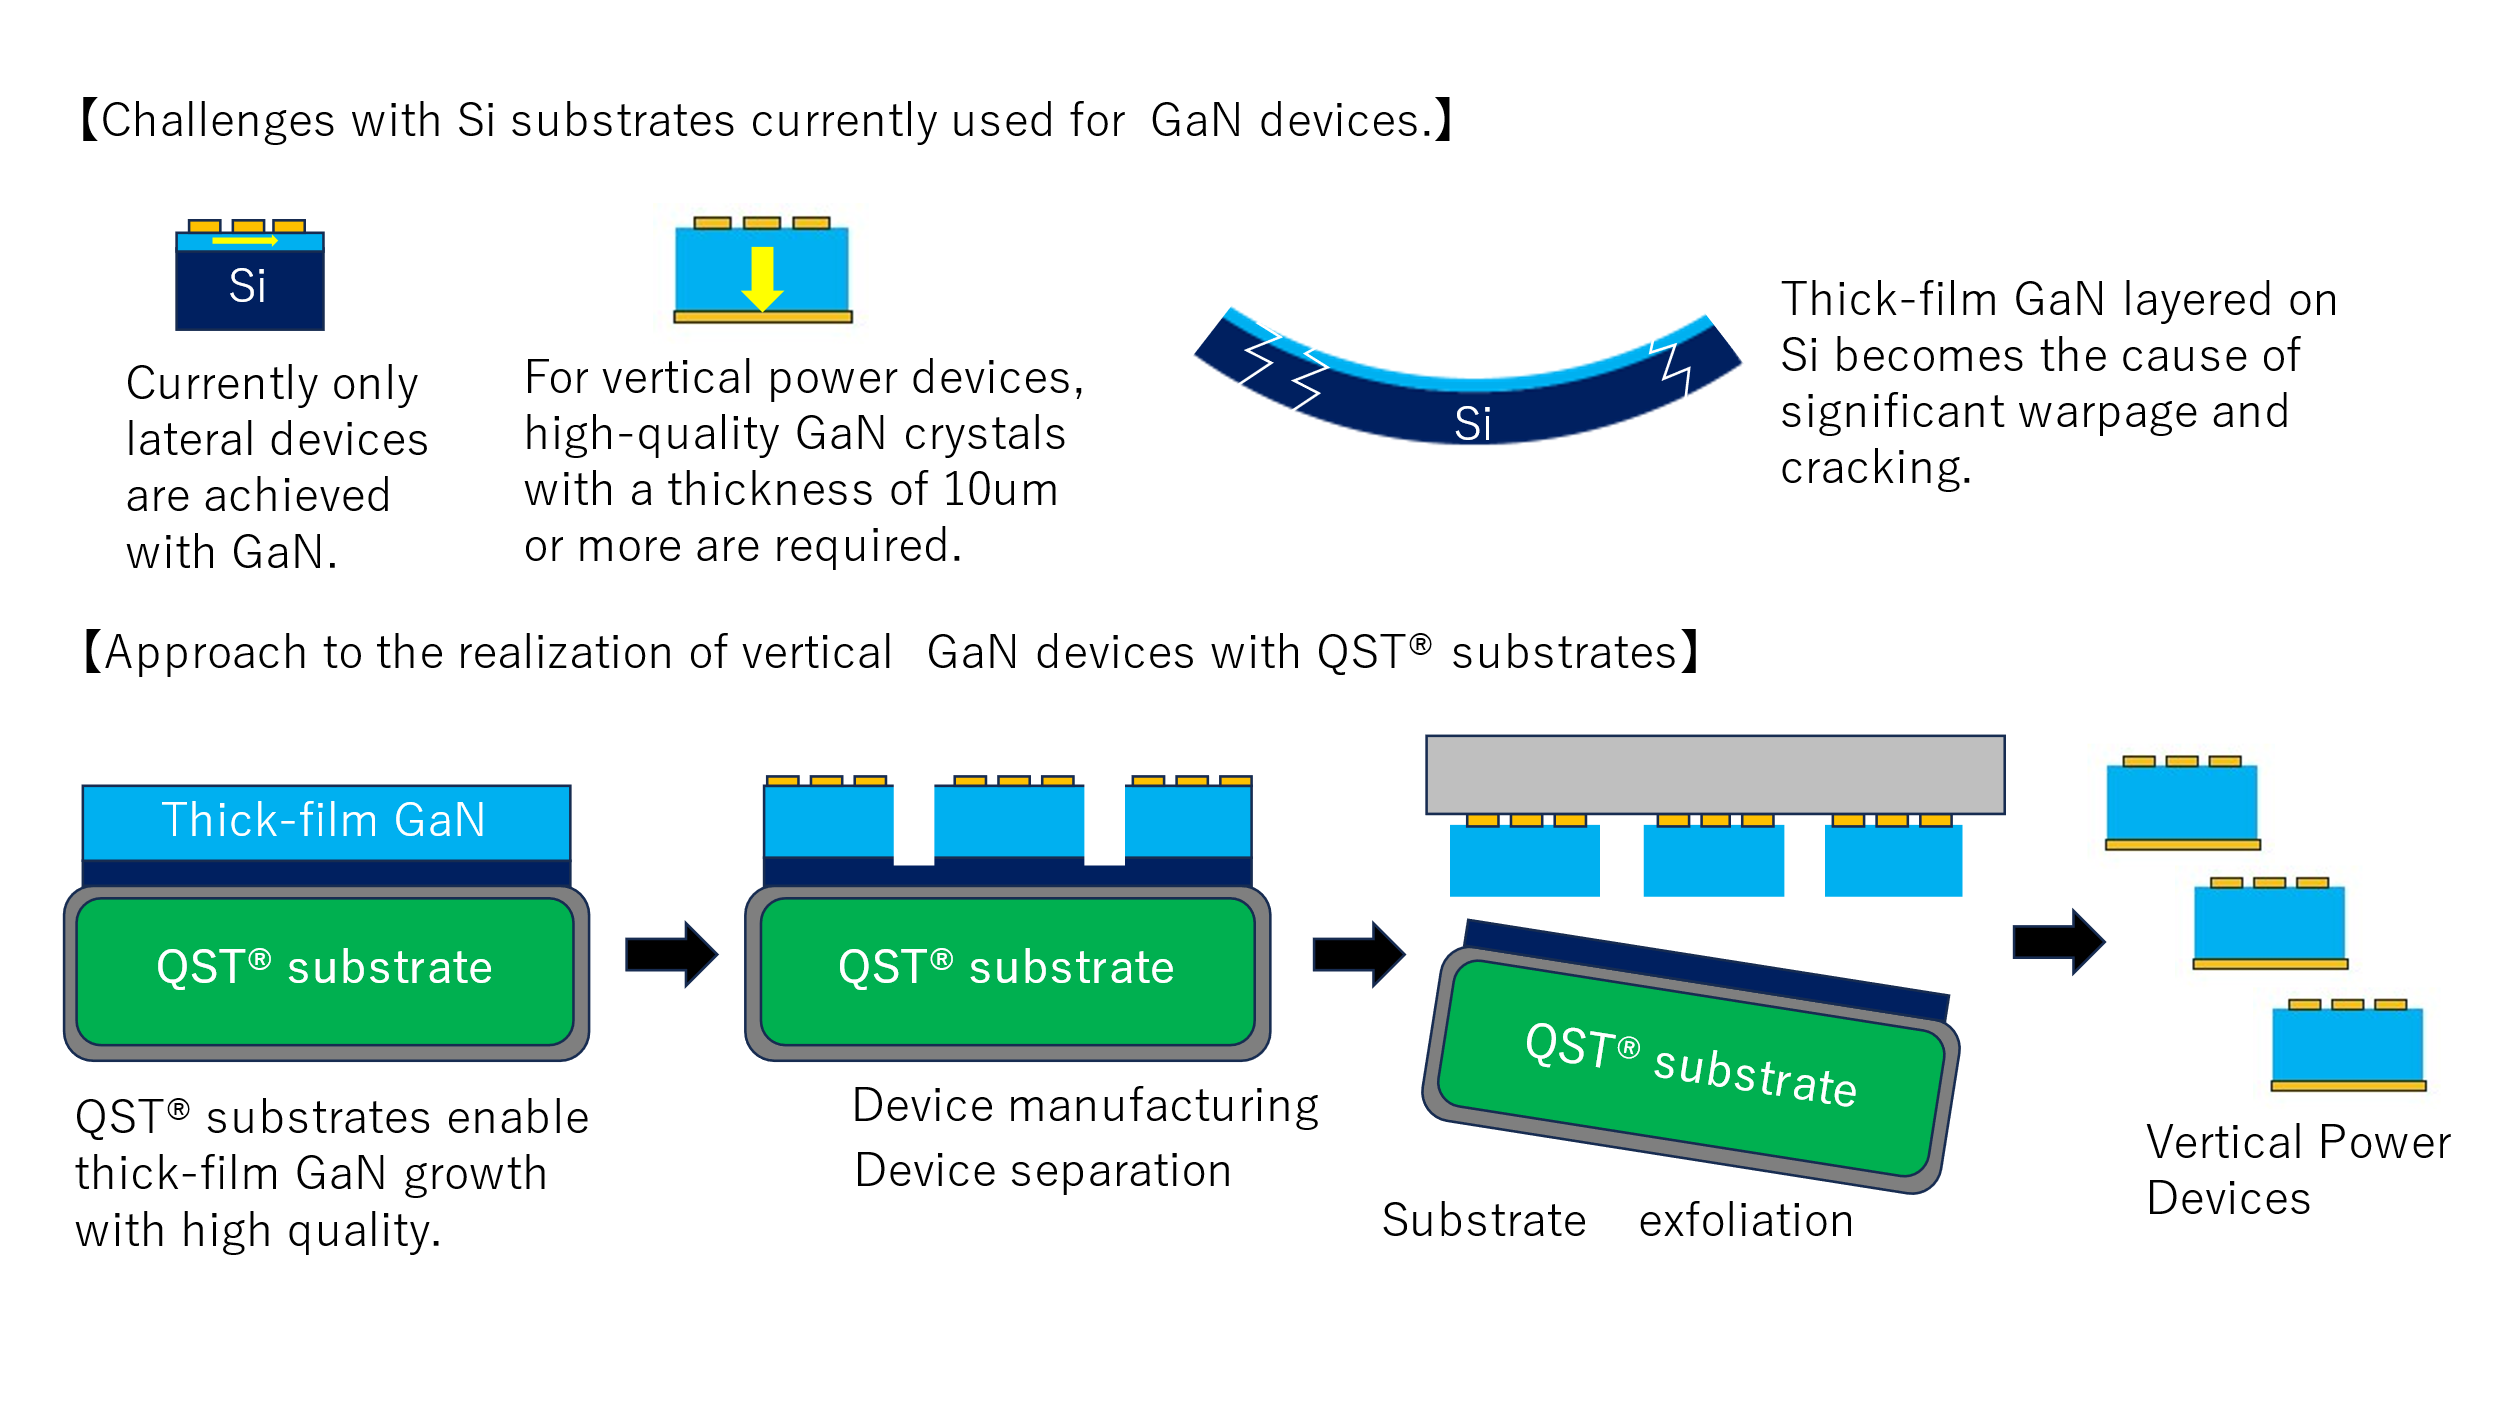 Figure: Challenges in realizing vertical GaN devices and the approach using QST substrates.